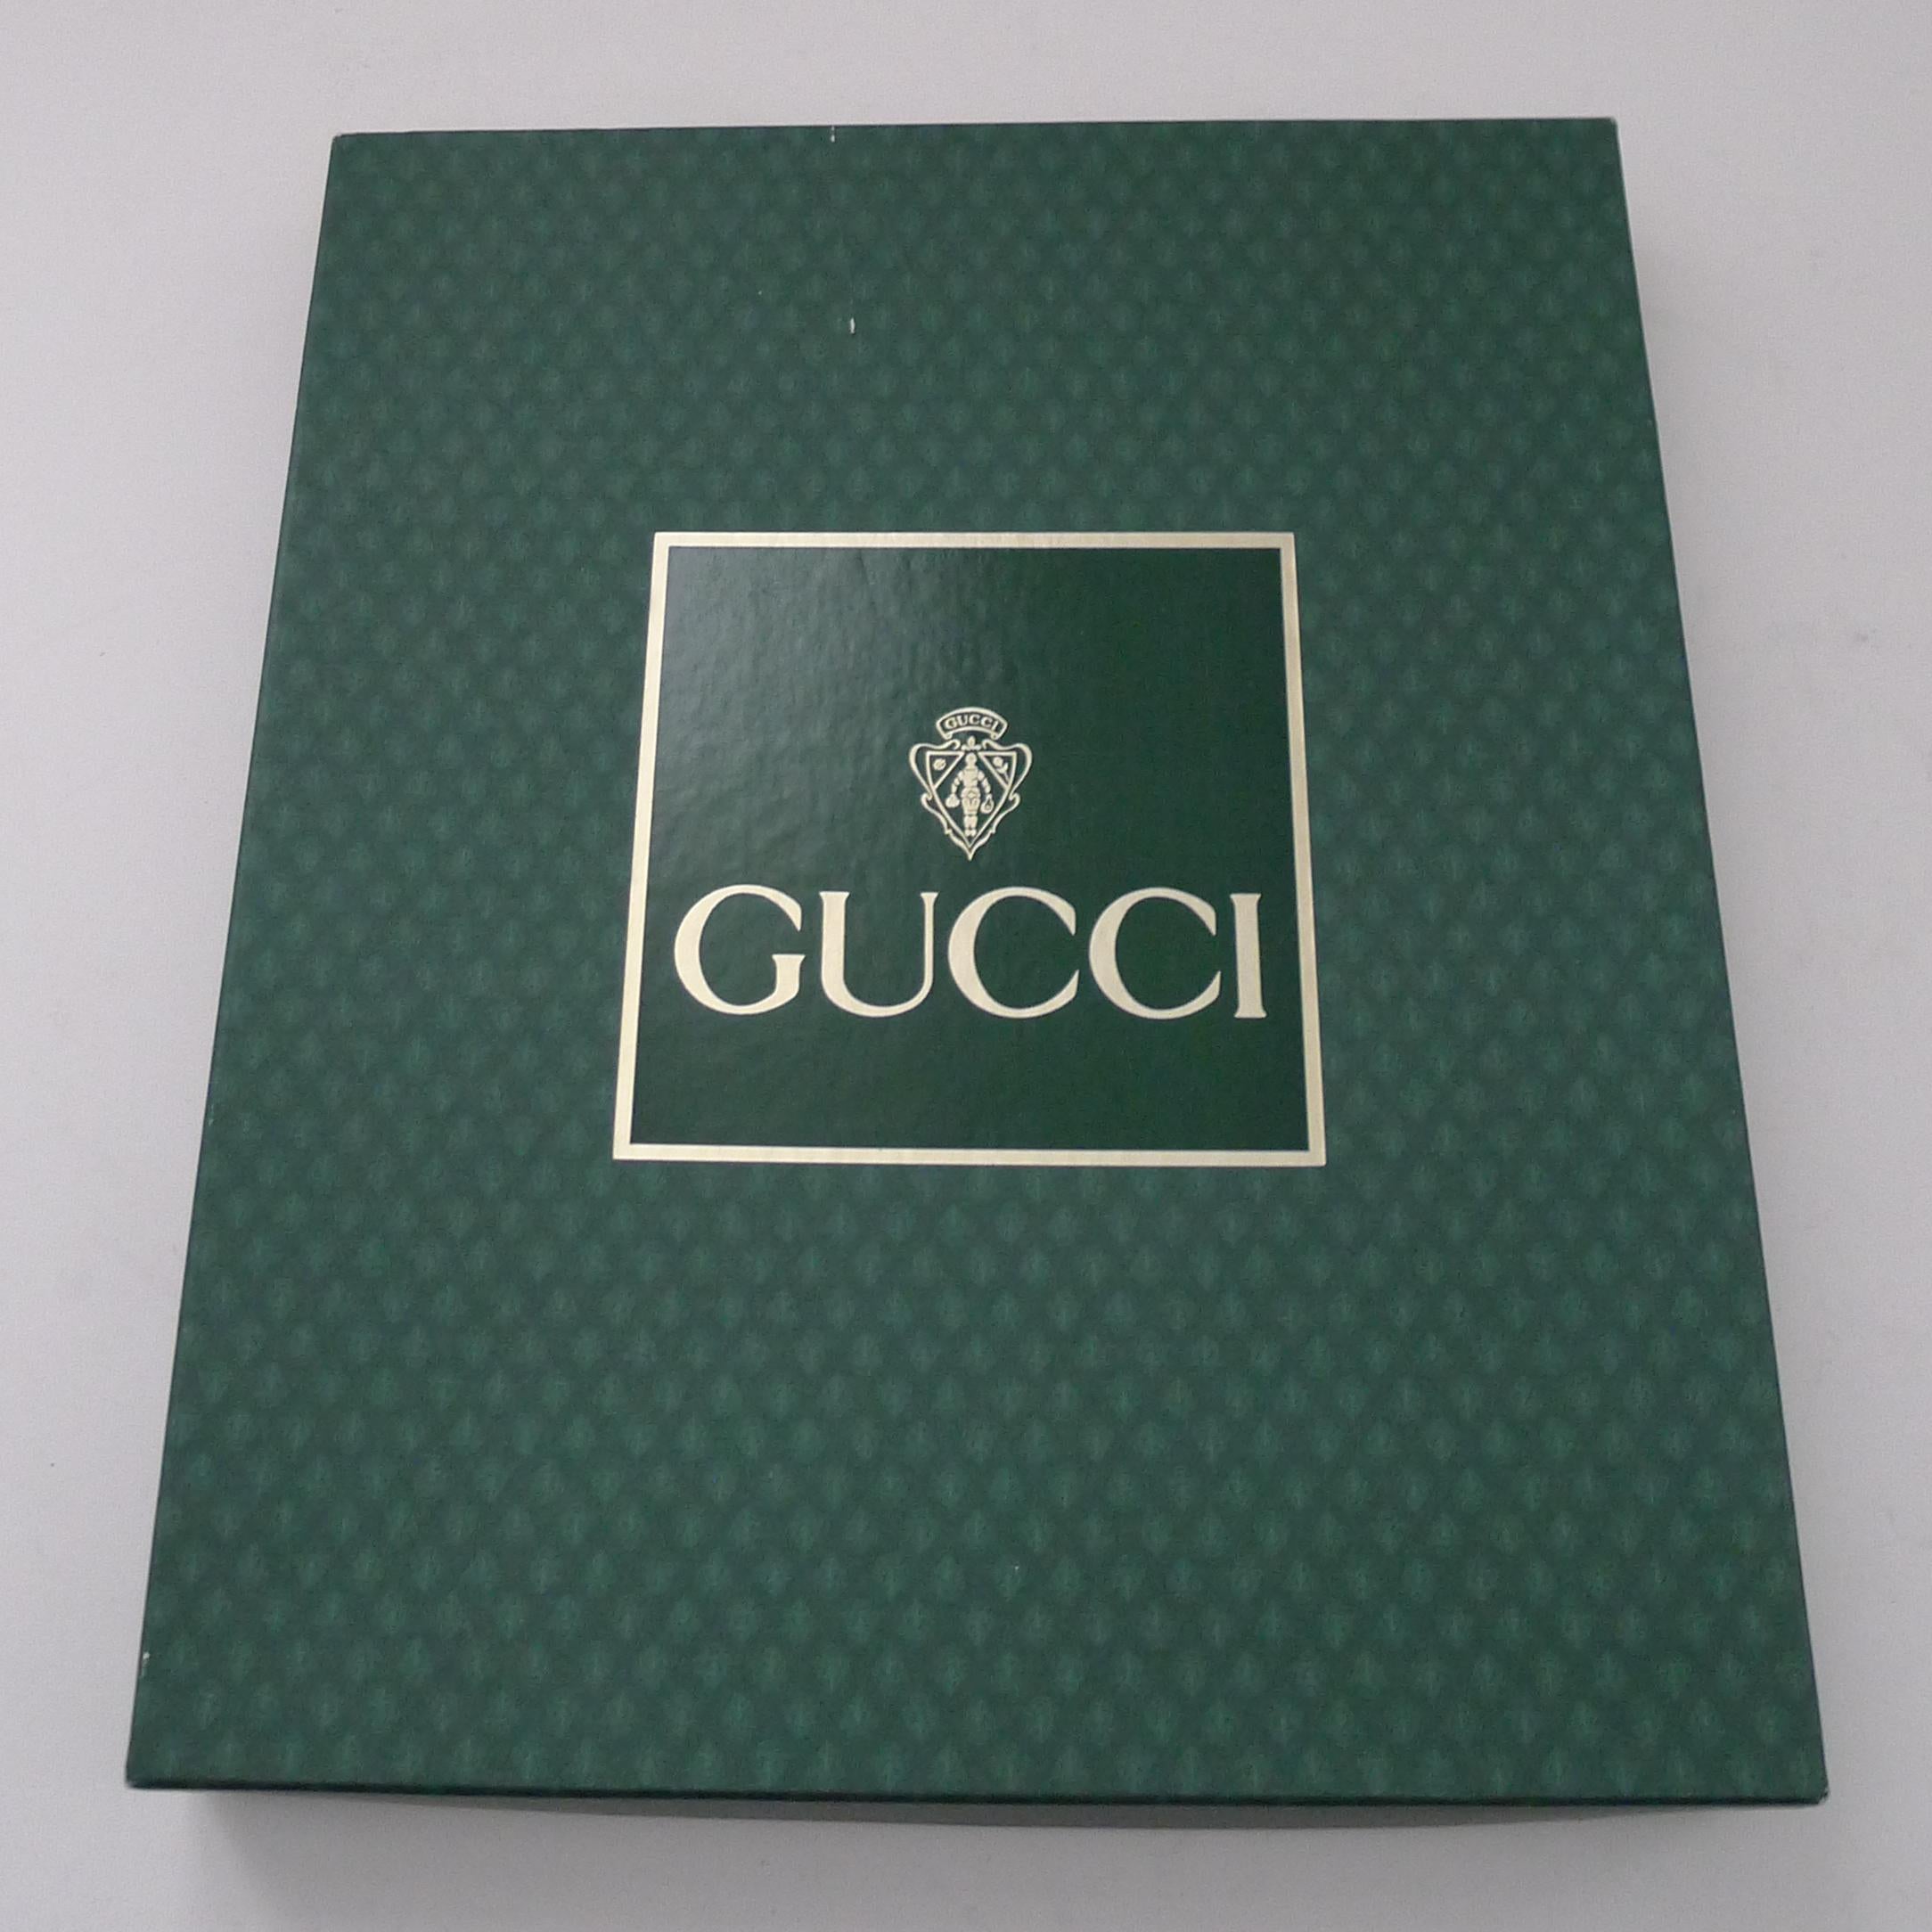 Large Vintage Italian Gucci Picture Frame c.1970 For Sale 13